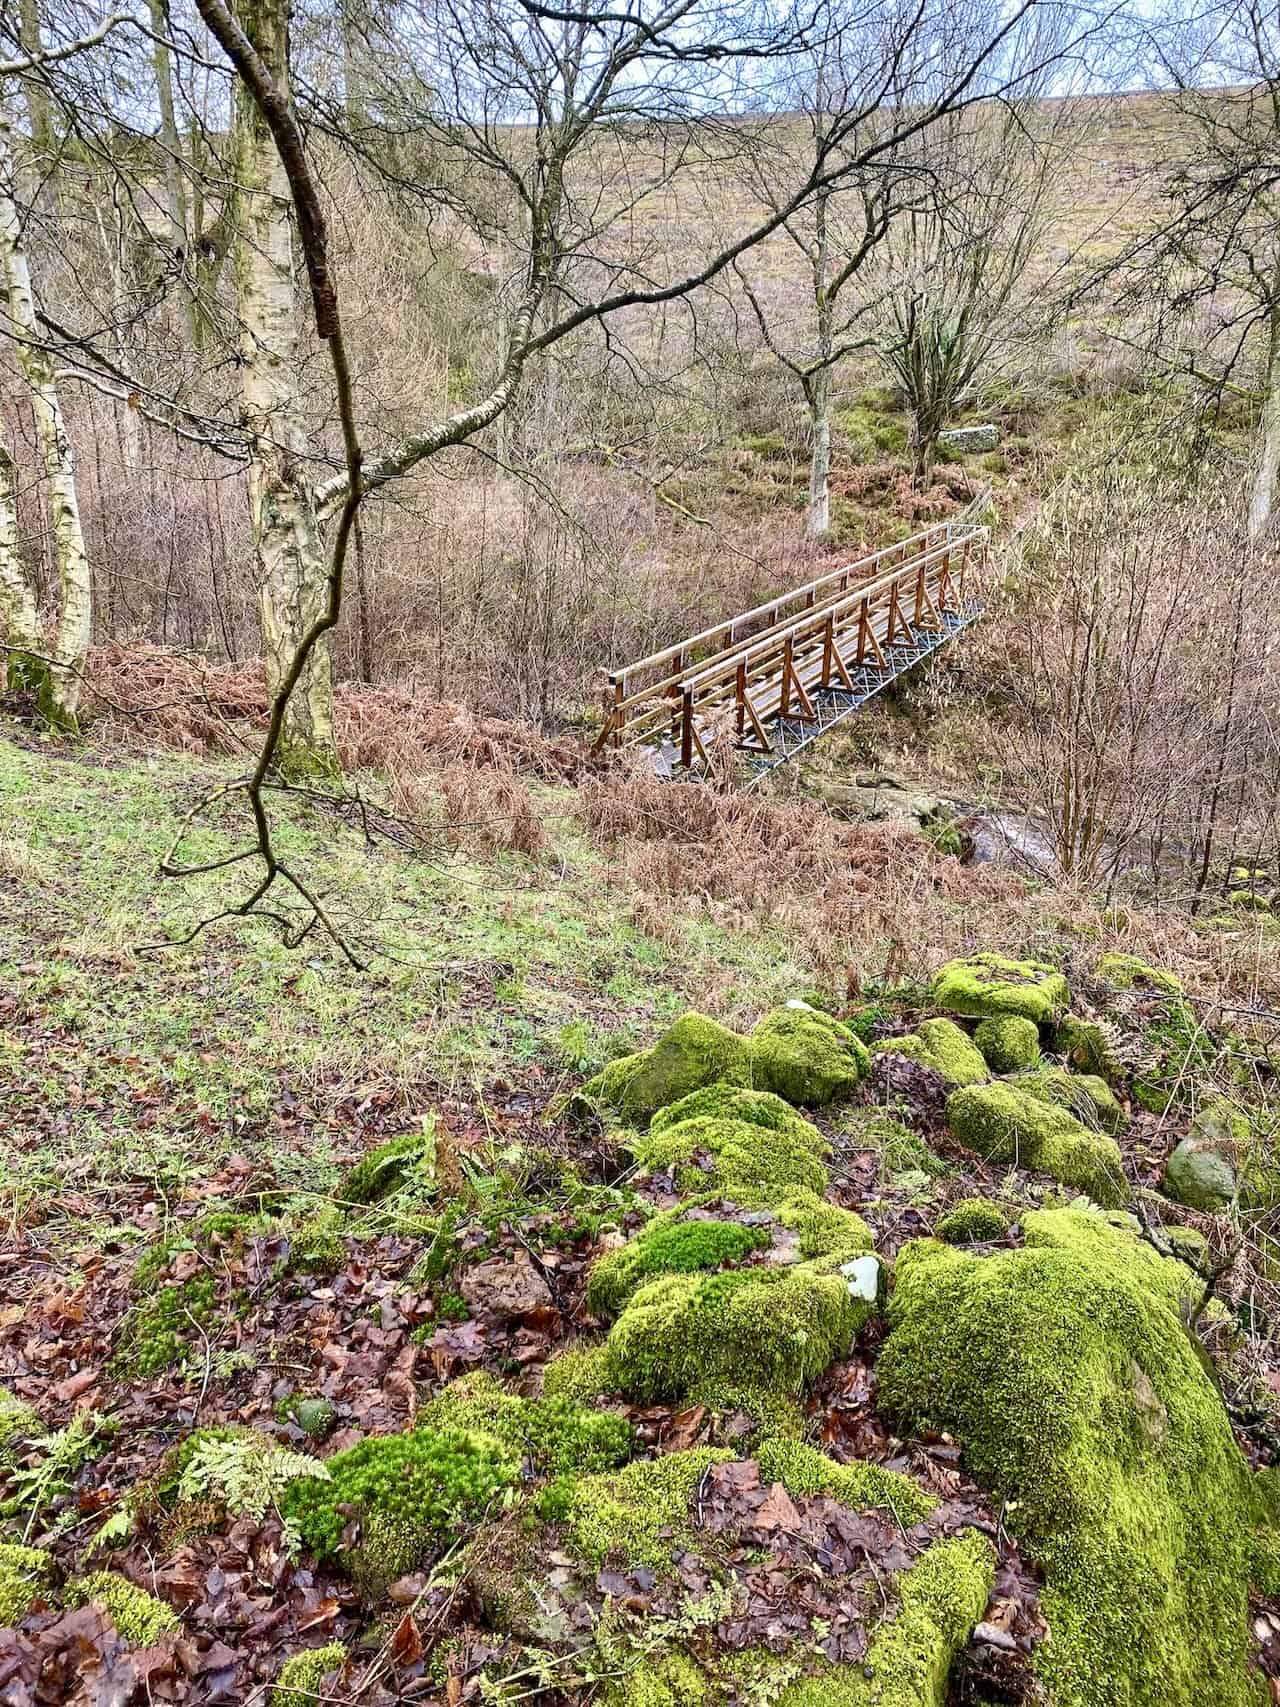 Footbridge across Ladhill Beck, the halfway point of our Hawnby Hill walk.